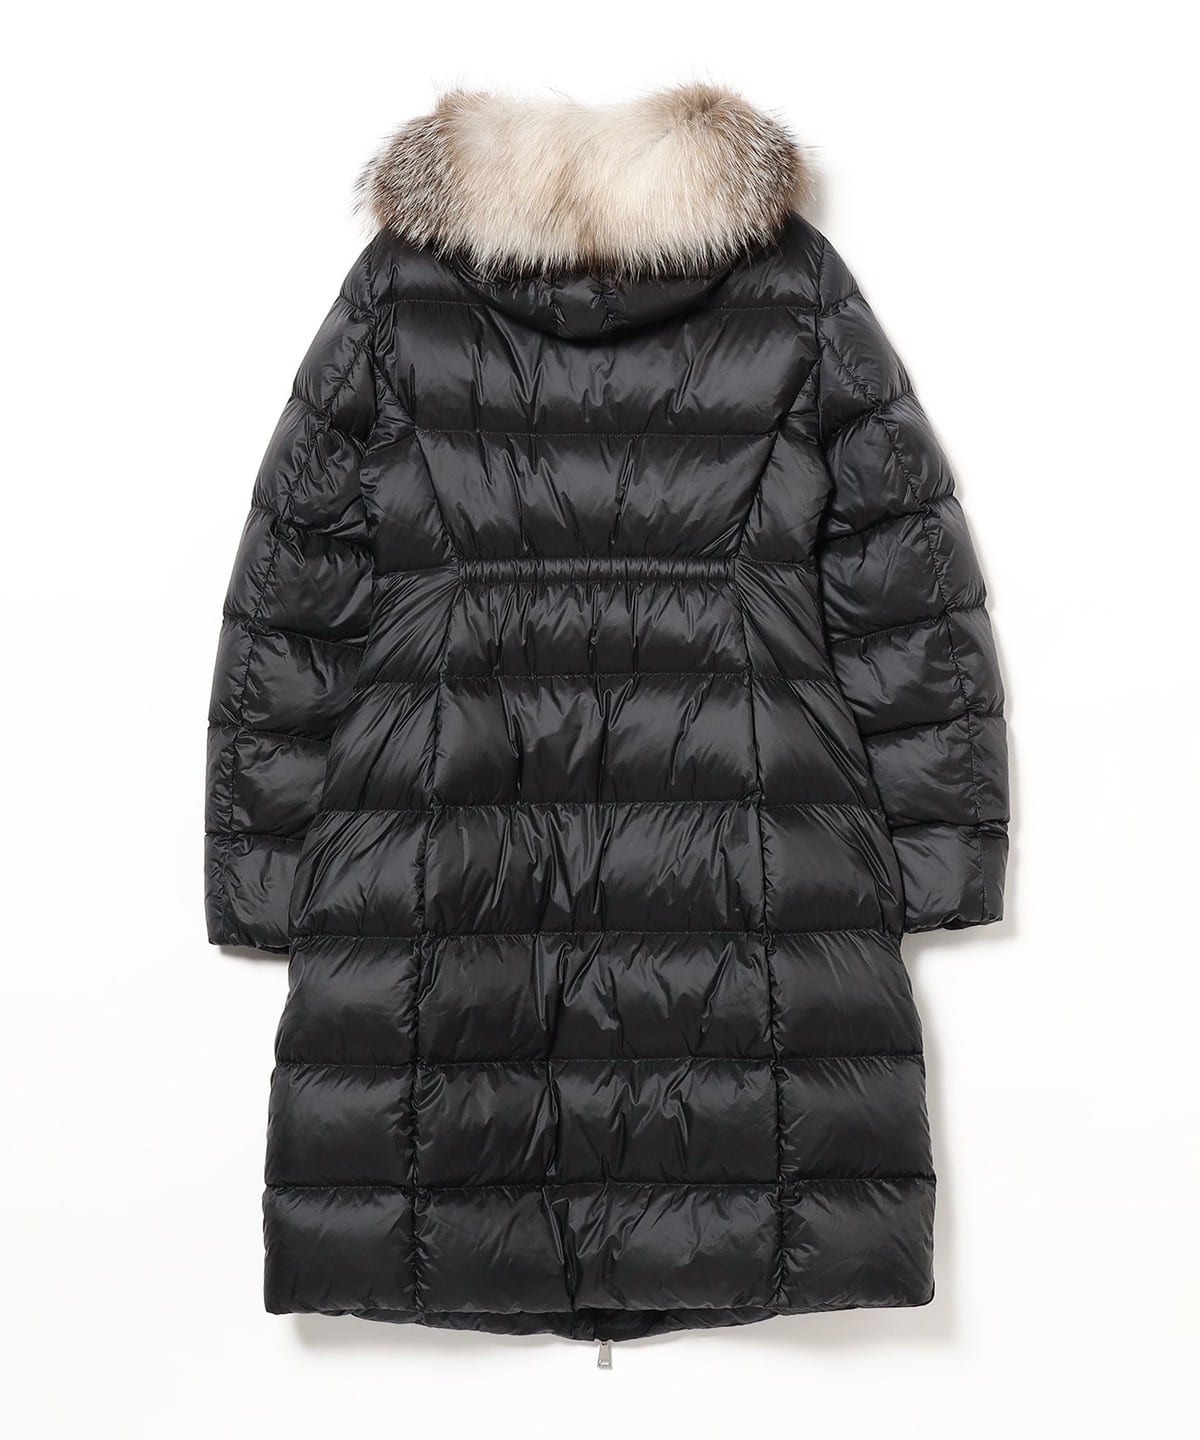 Demi-Luxe BEAMS（デミルクス ビームス）【POP UP STORE開催】MONCLER ...